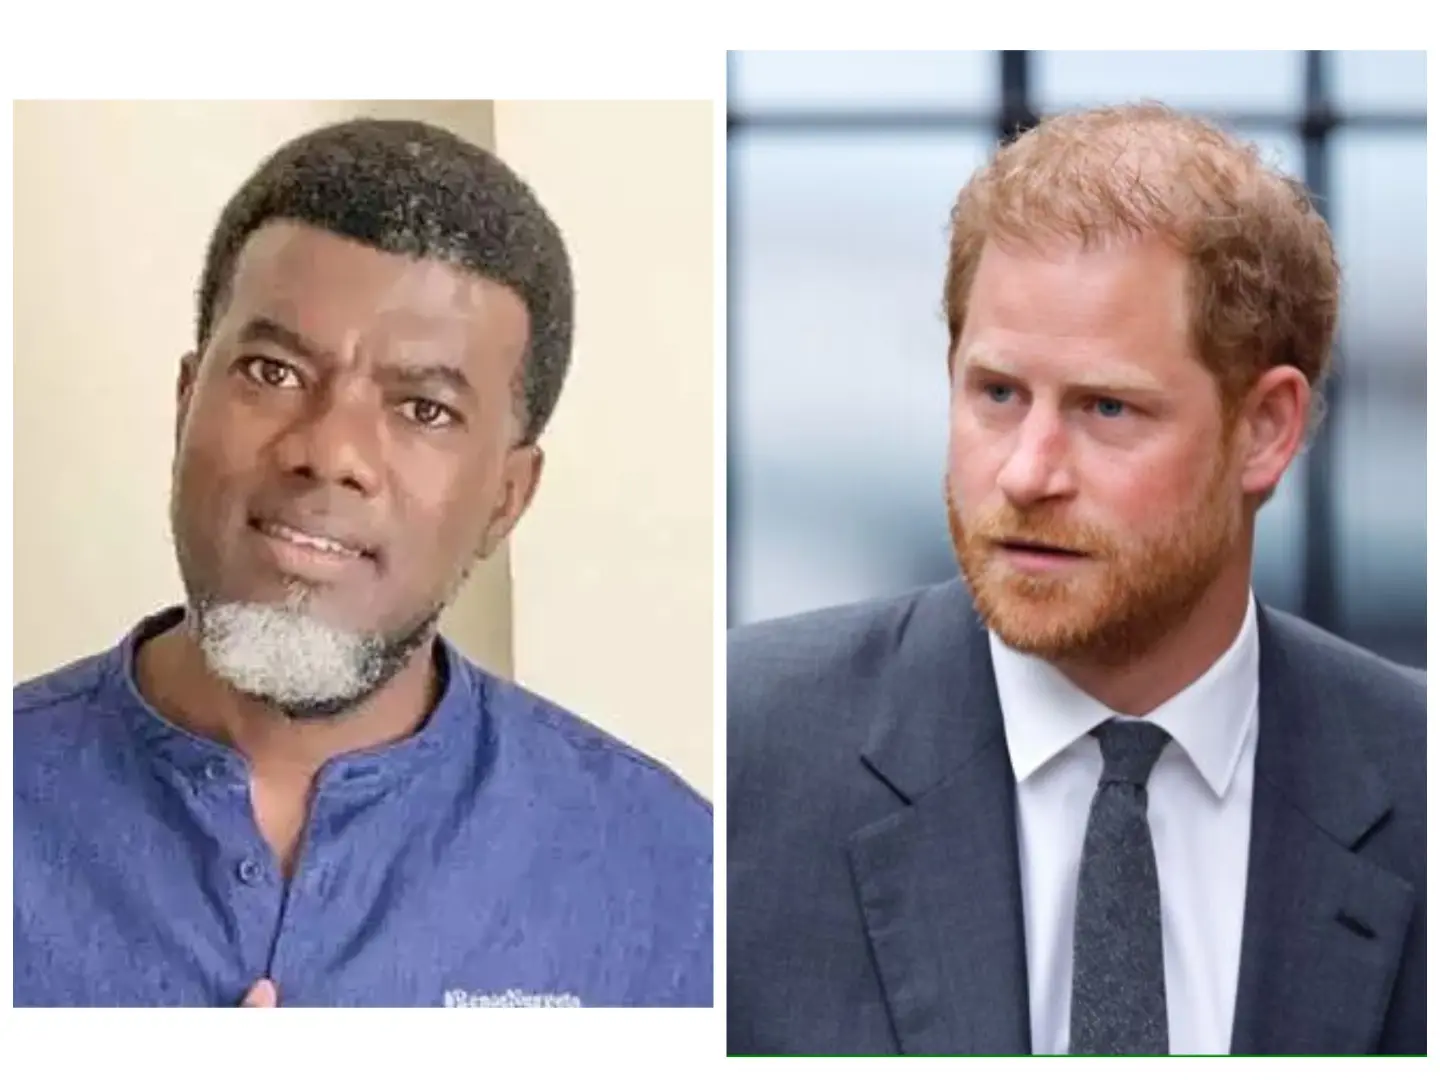 Reno Omokri attacks Prince Harry over reports of visiting ‘unsafe’ territory’